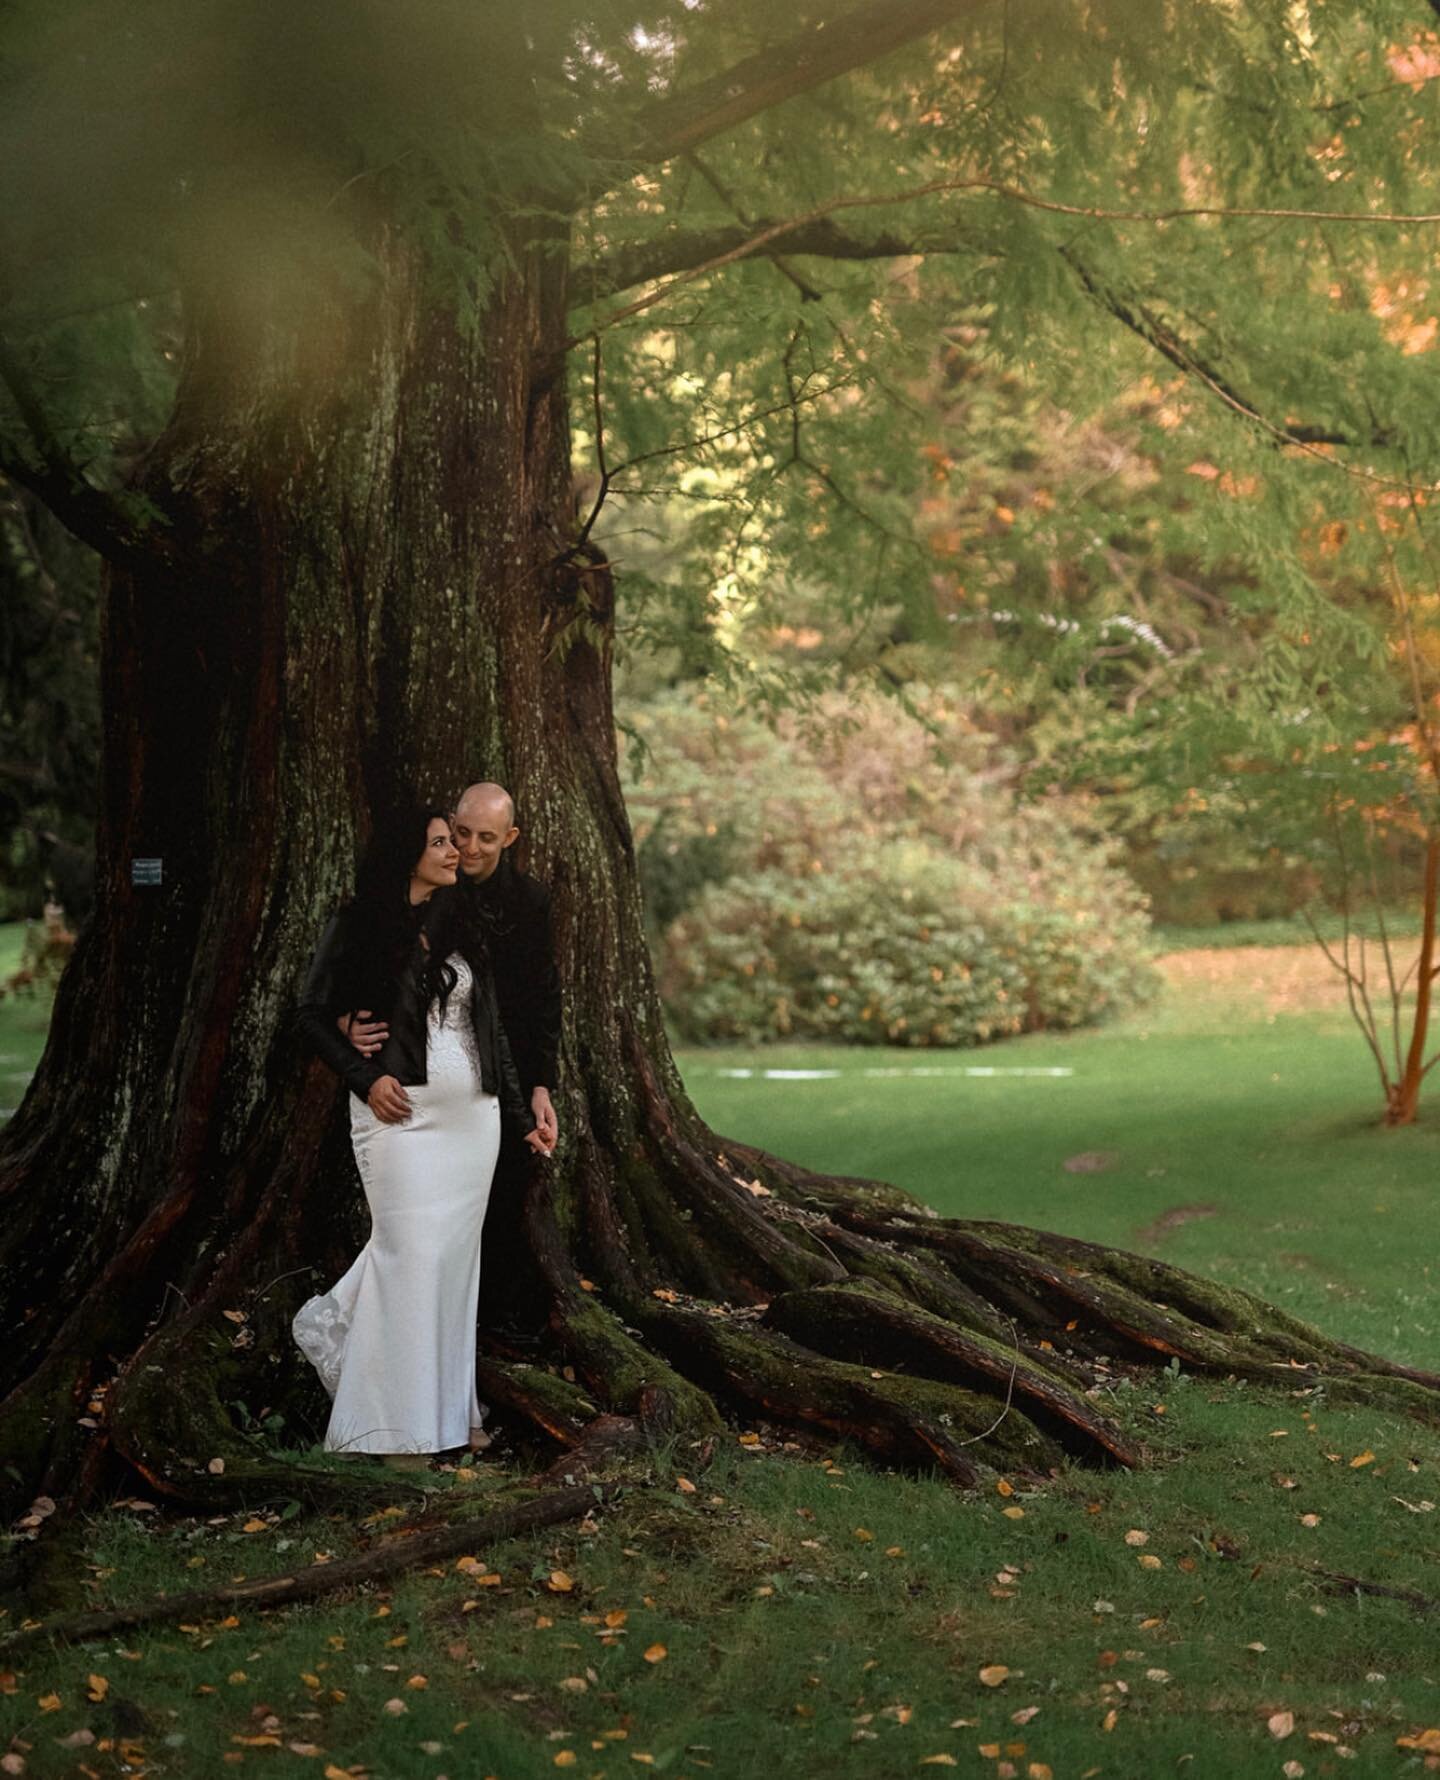 Happy Monday, friends.

I spent my weekend alternating between editing this beautiful wedding, and 19 mini sessions (only 10 more to go!) and I kept thinking of this tree.

The oldest in the region, this redwood once started as a seed from Harvard Un